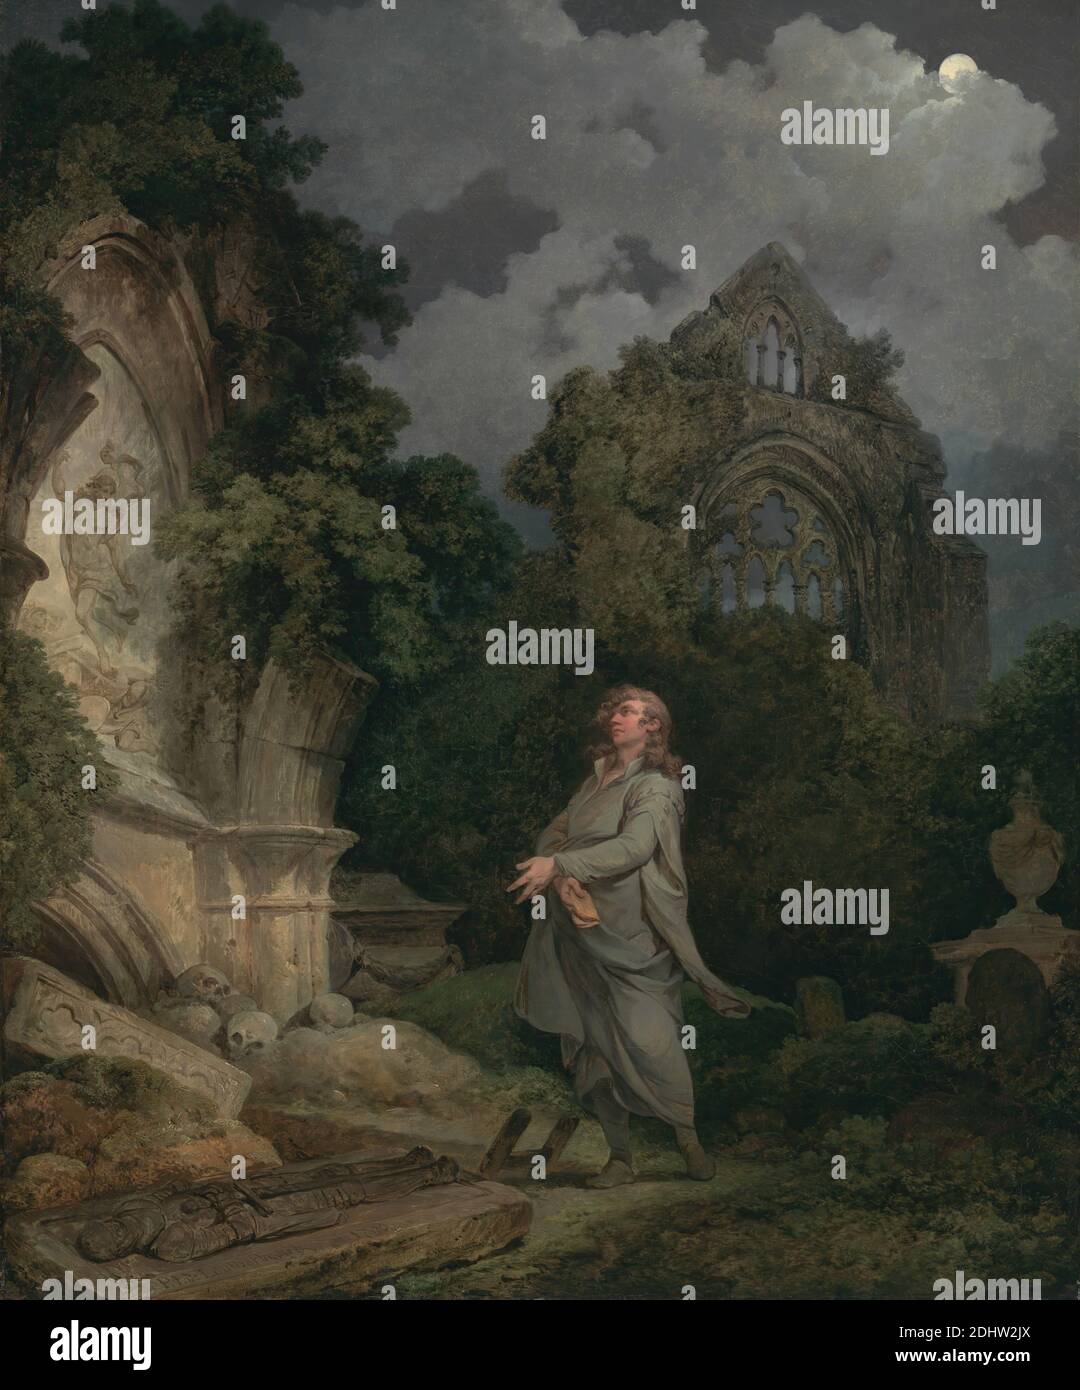 A Philosopher in a Moonlit Churchyard, Philippe-Jacques de Loutherbourg, 1740–1812, French, active in Britain (from 1771), 1790, Oil on canvas, Support (PTG): 34 x 27 inches (86.4 x 68.6 cm), arch, bust, cemetery, churchyard, clouds, costume, death, fresco, genre subject, Gothic (Medieval), grave, landscape, man, night, Picturesque, the, relief (sculpture), Romantic, ruins, sarcophagus, skulls (skeleton components), Sublime, the, theater, urn Stock Photo